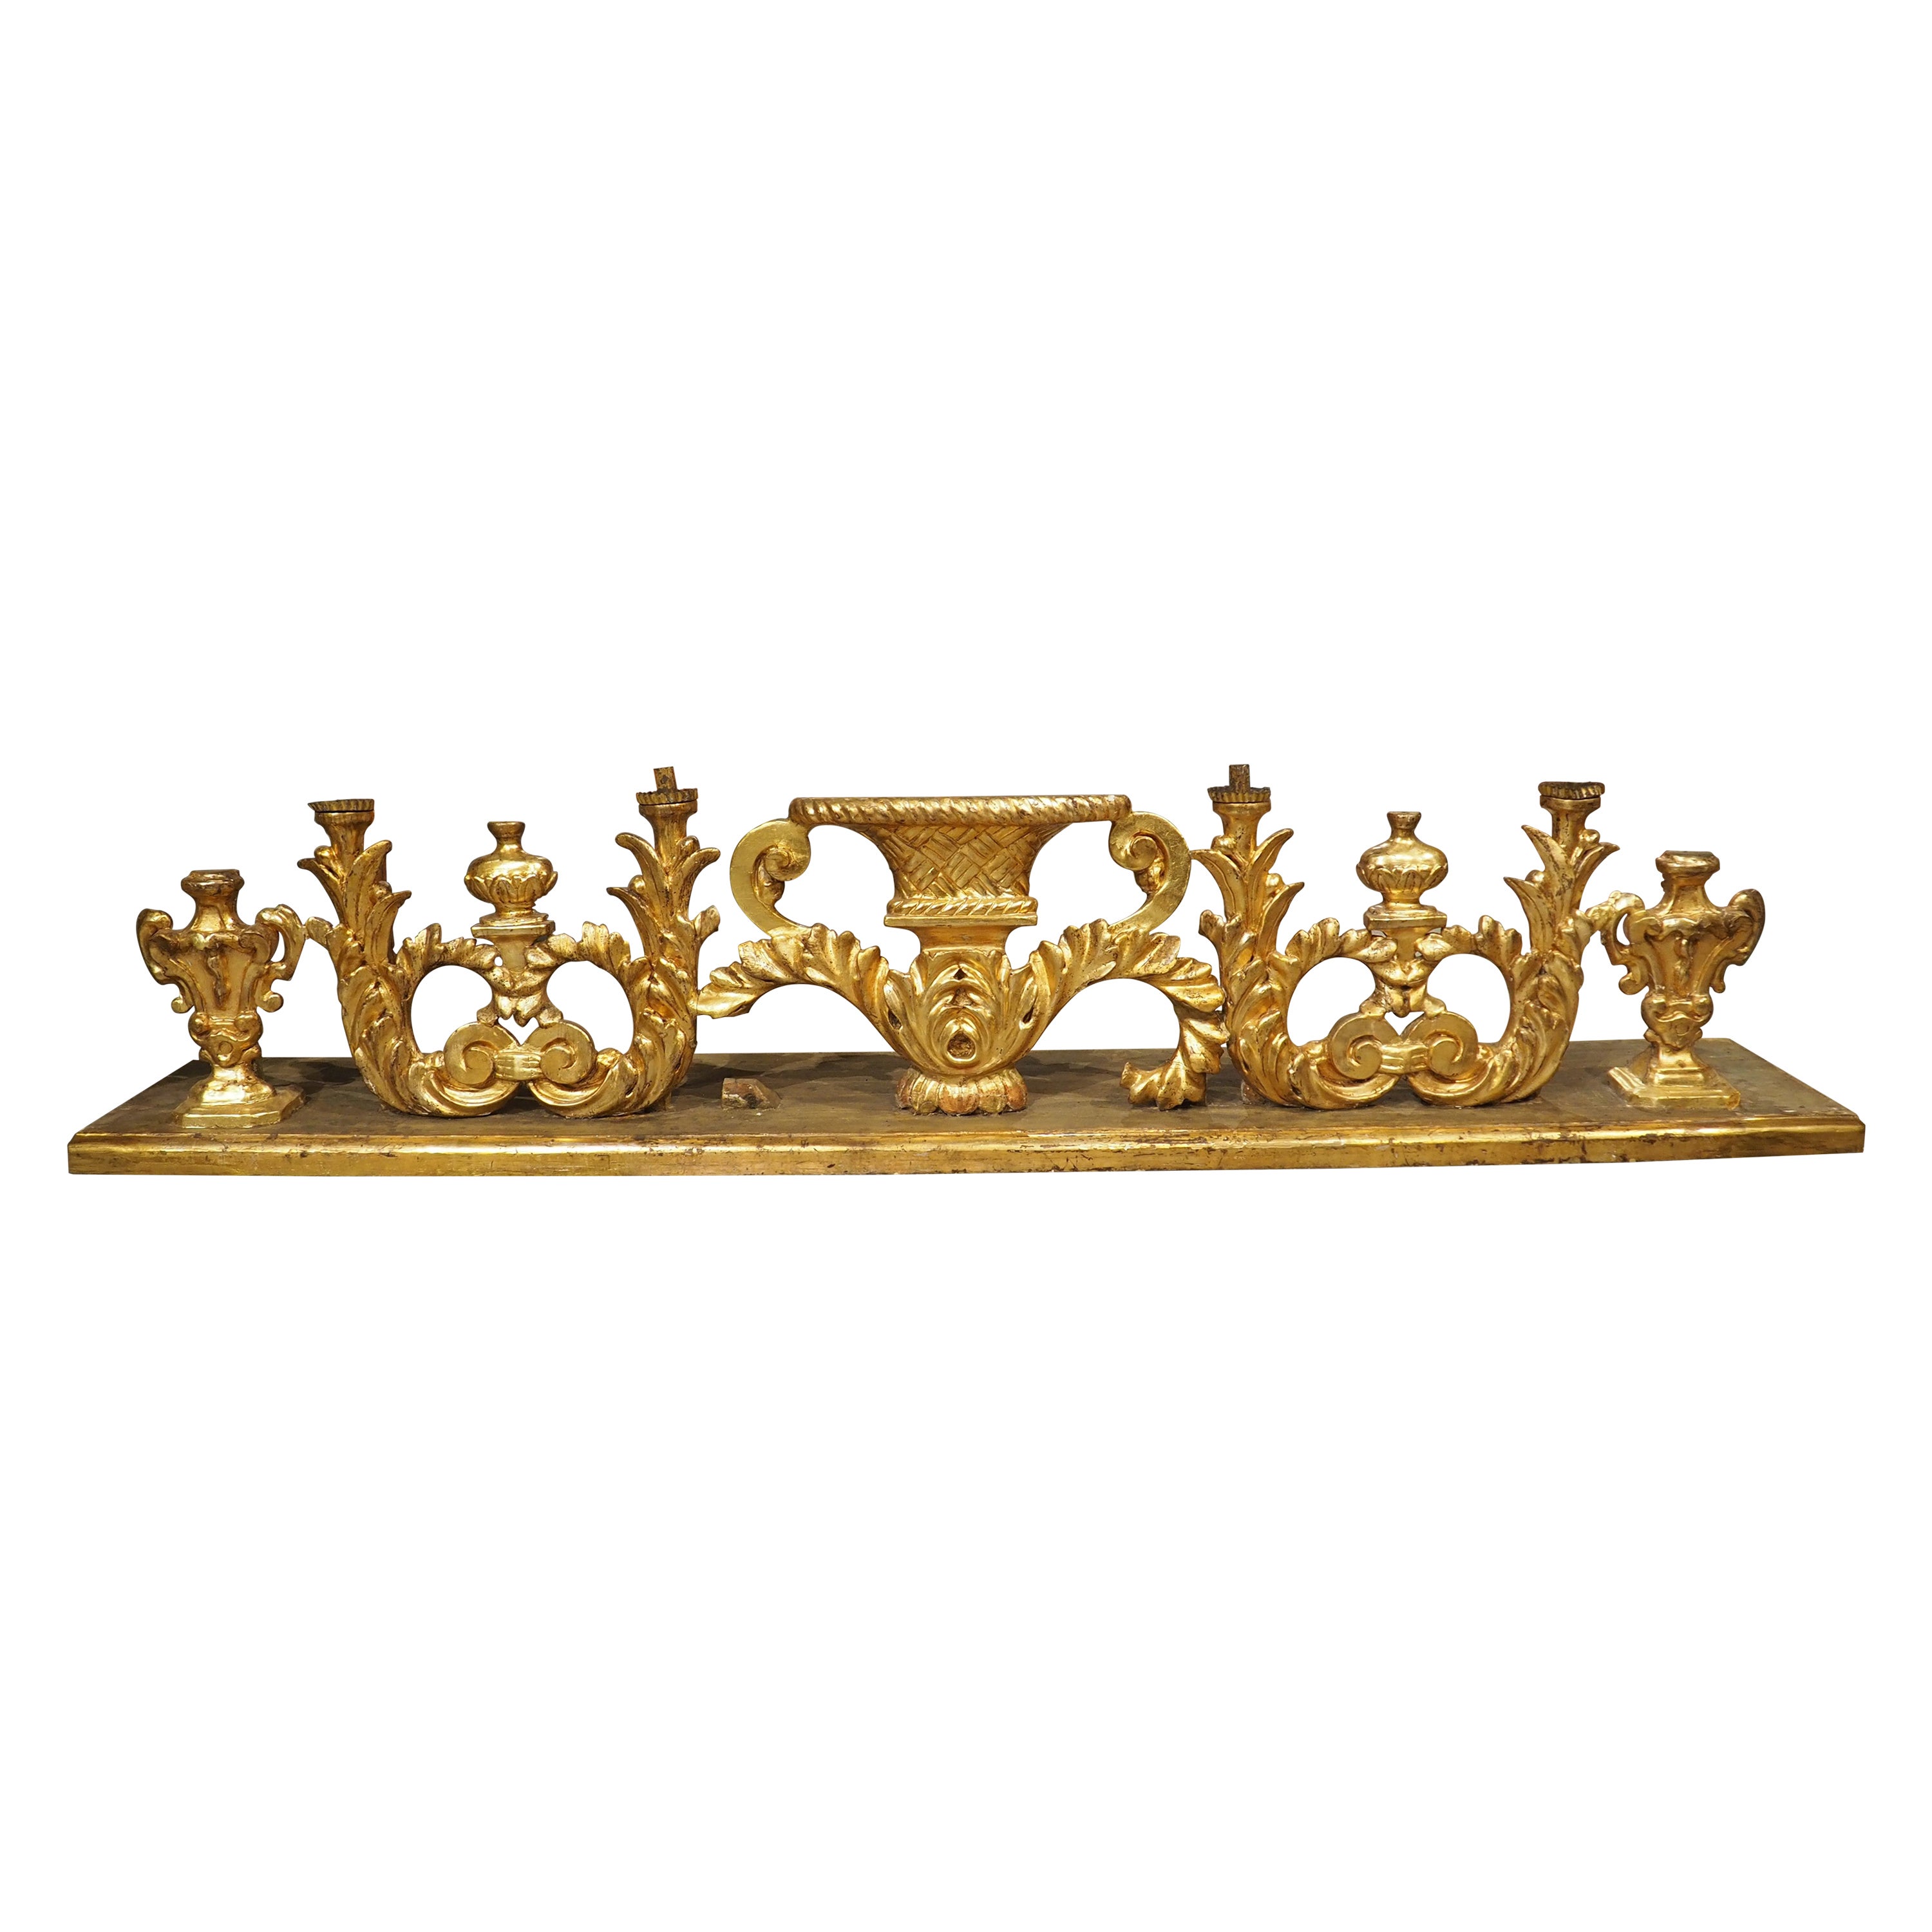 Circa 1750 Carved and Gilded Altar Candelabra from Tuscany, Italy 73 inches Long For Sale